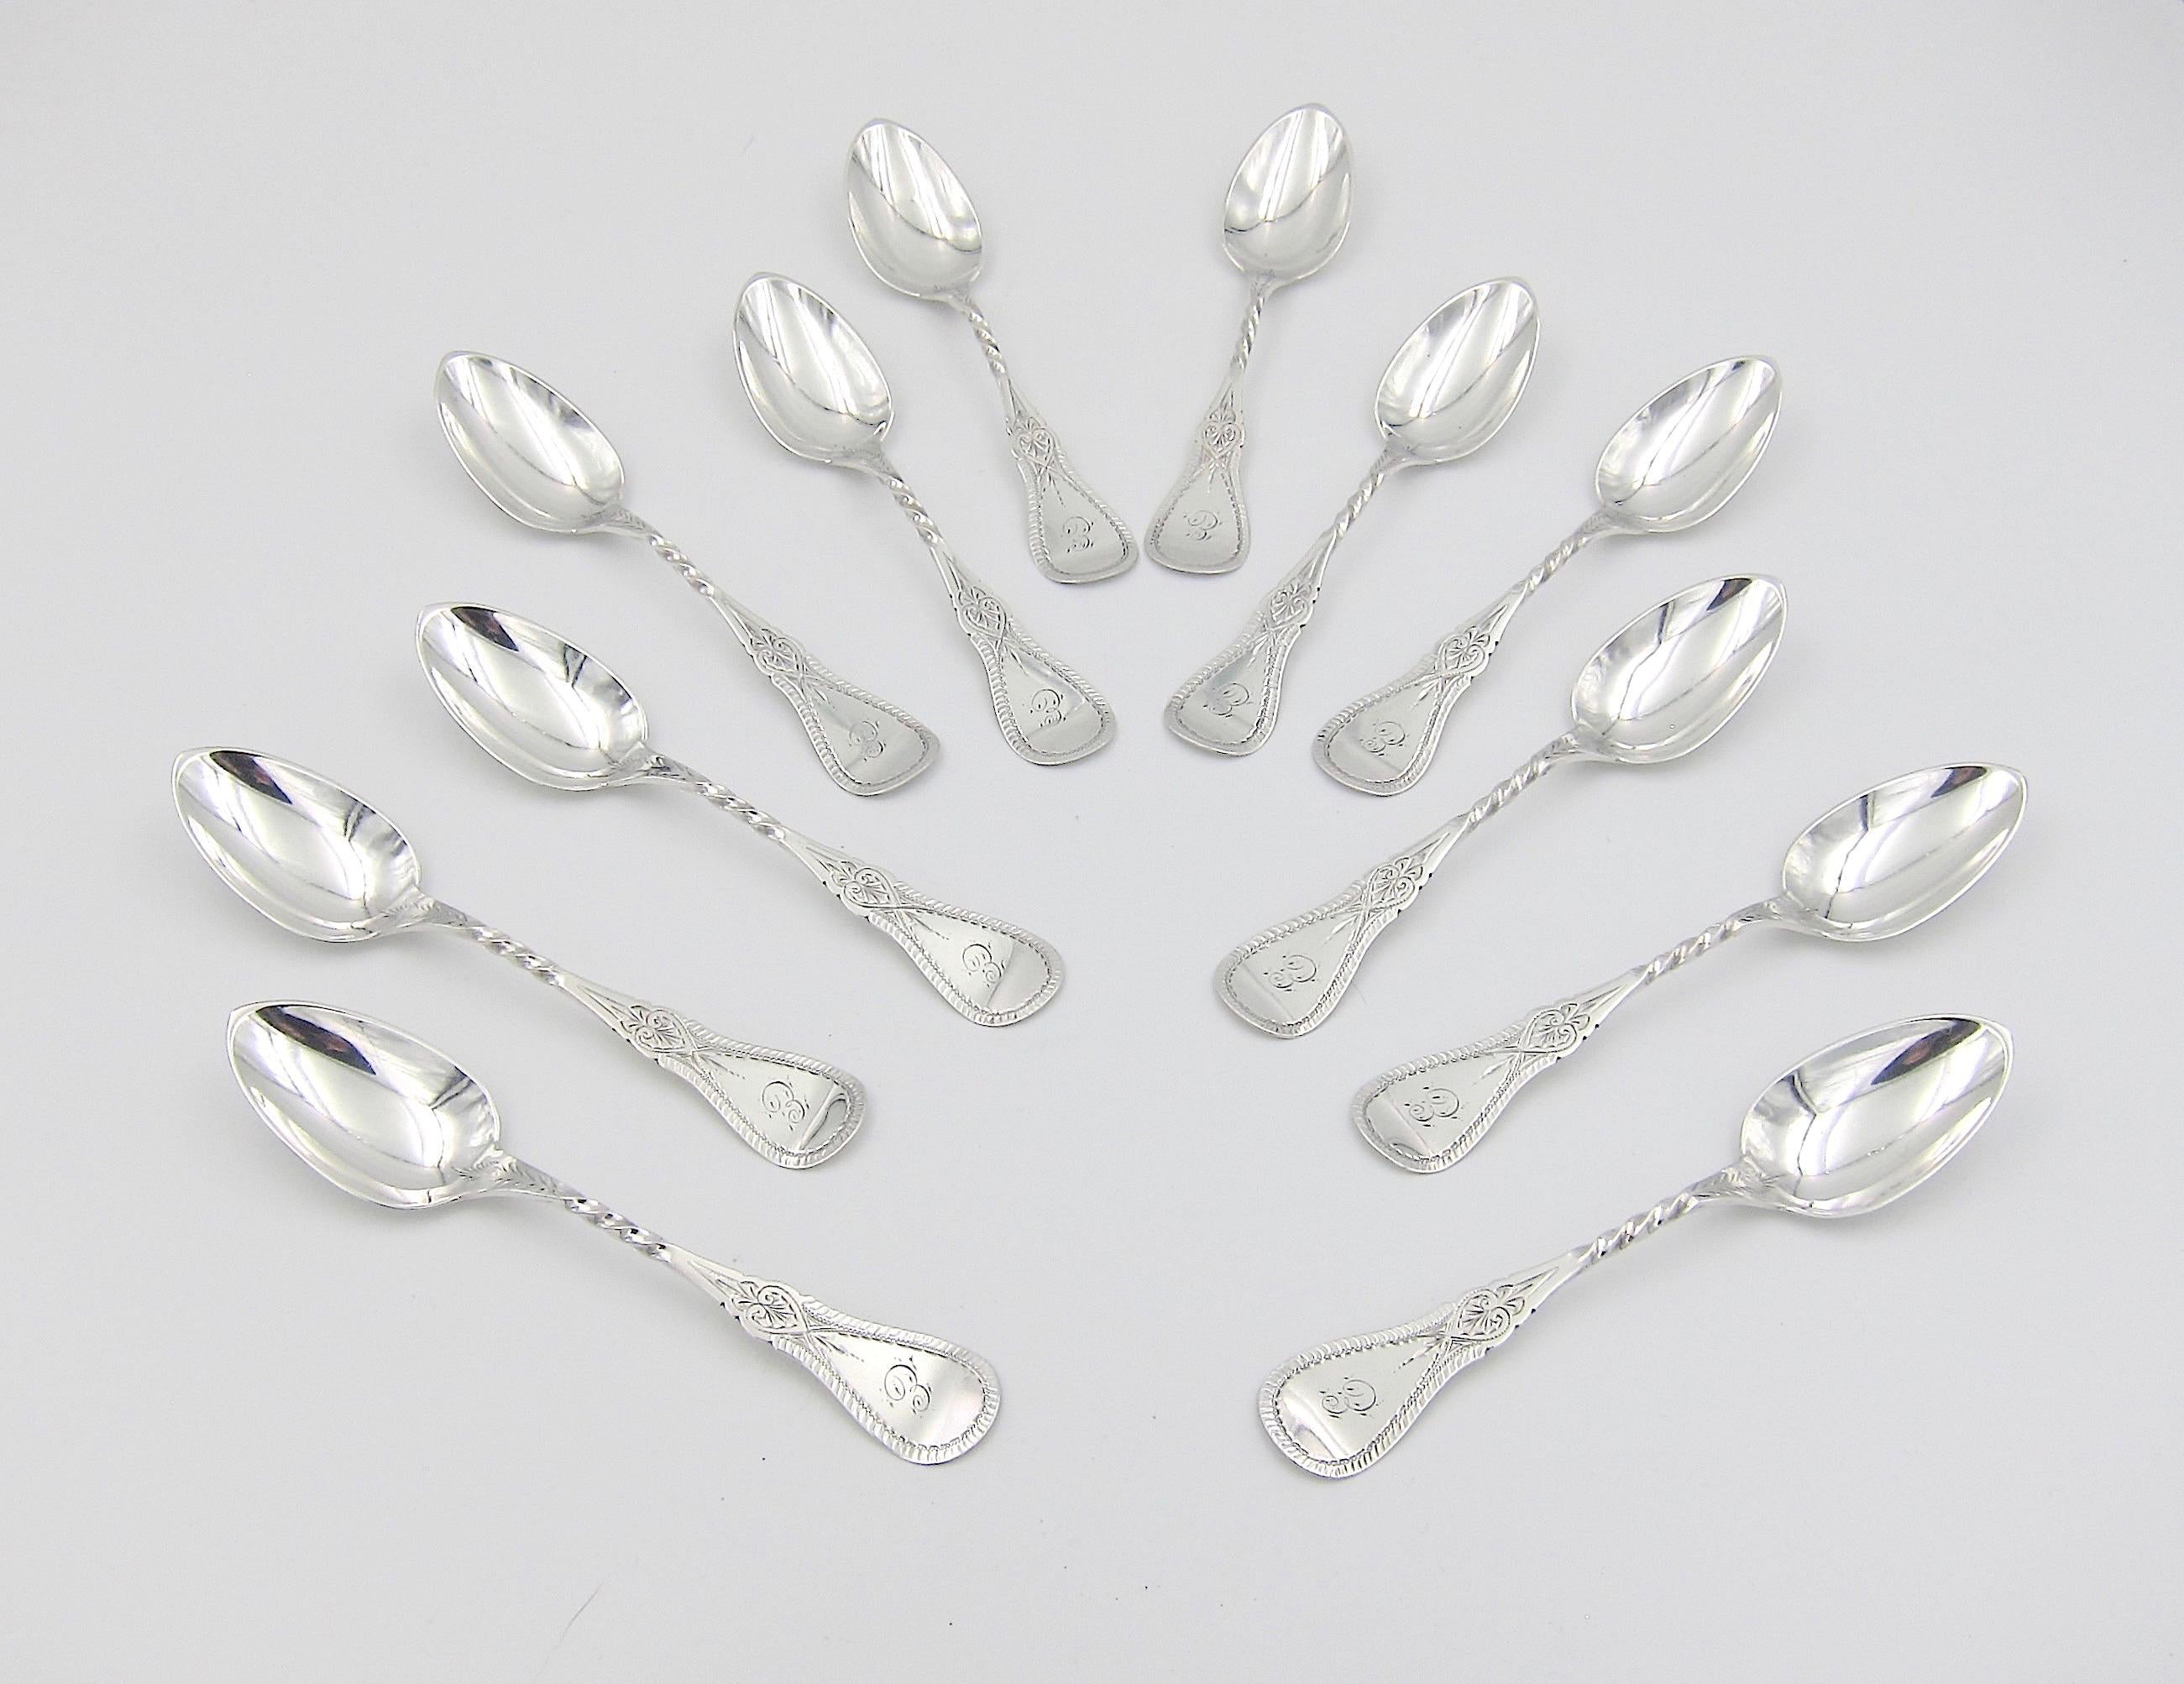 Engraved Antique American Coin Silver Spoon Set by James Watts of Philadelphia